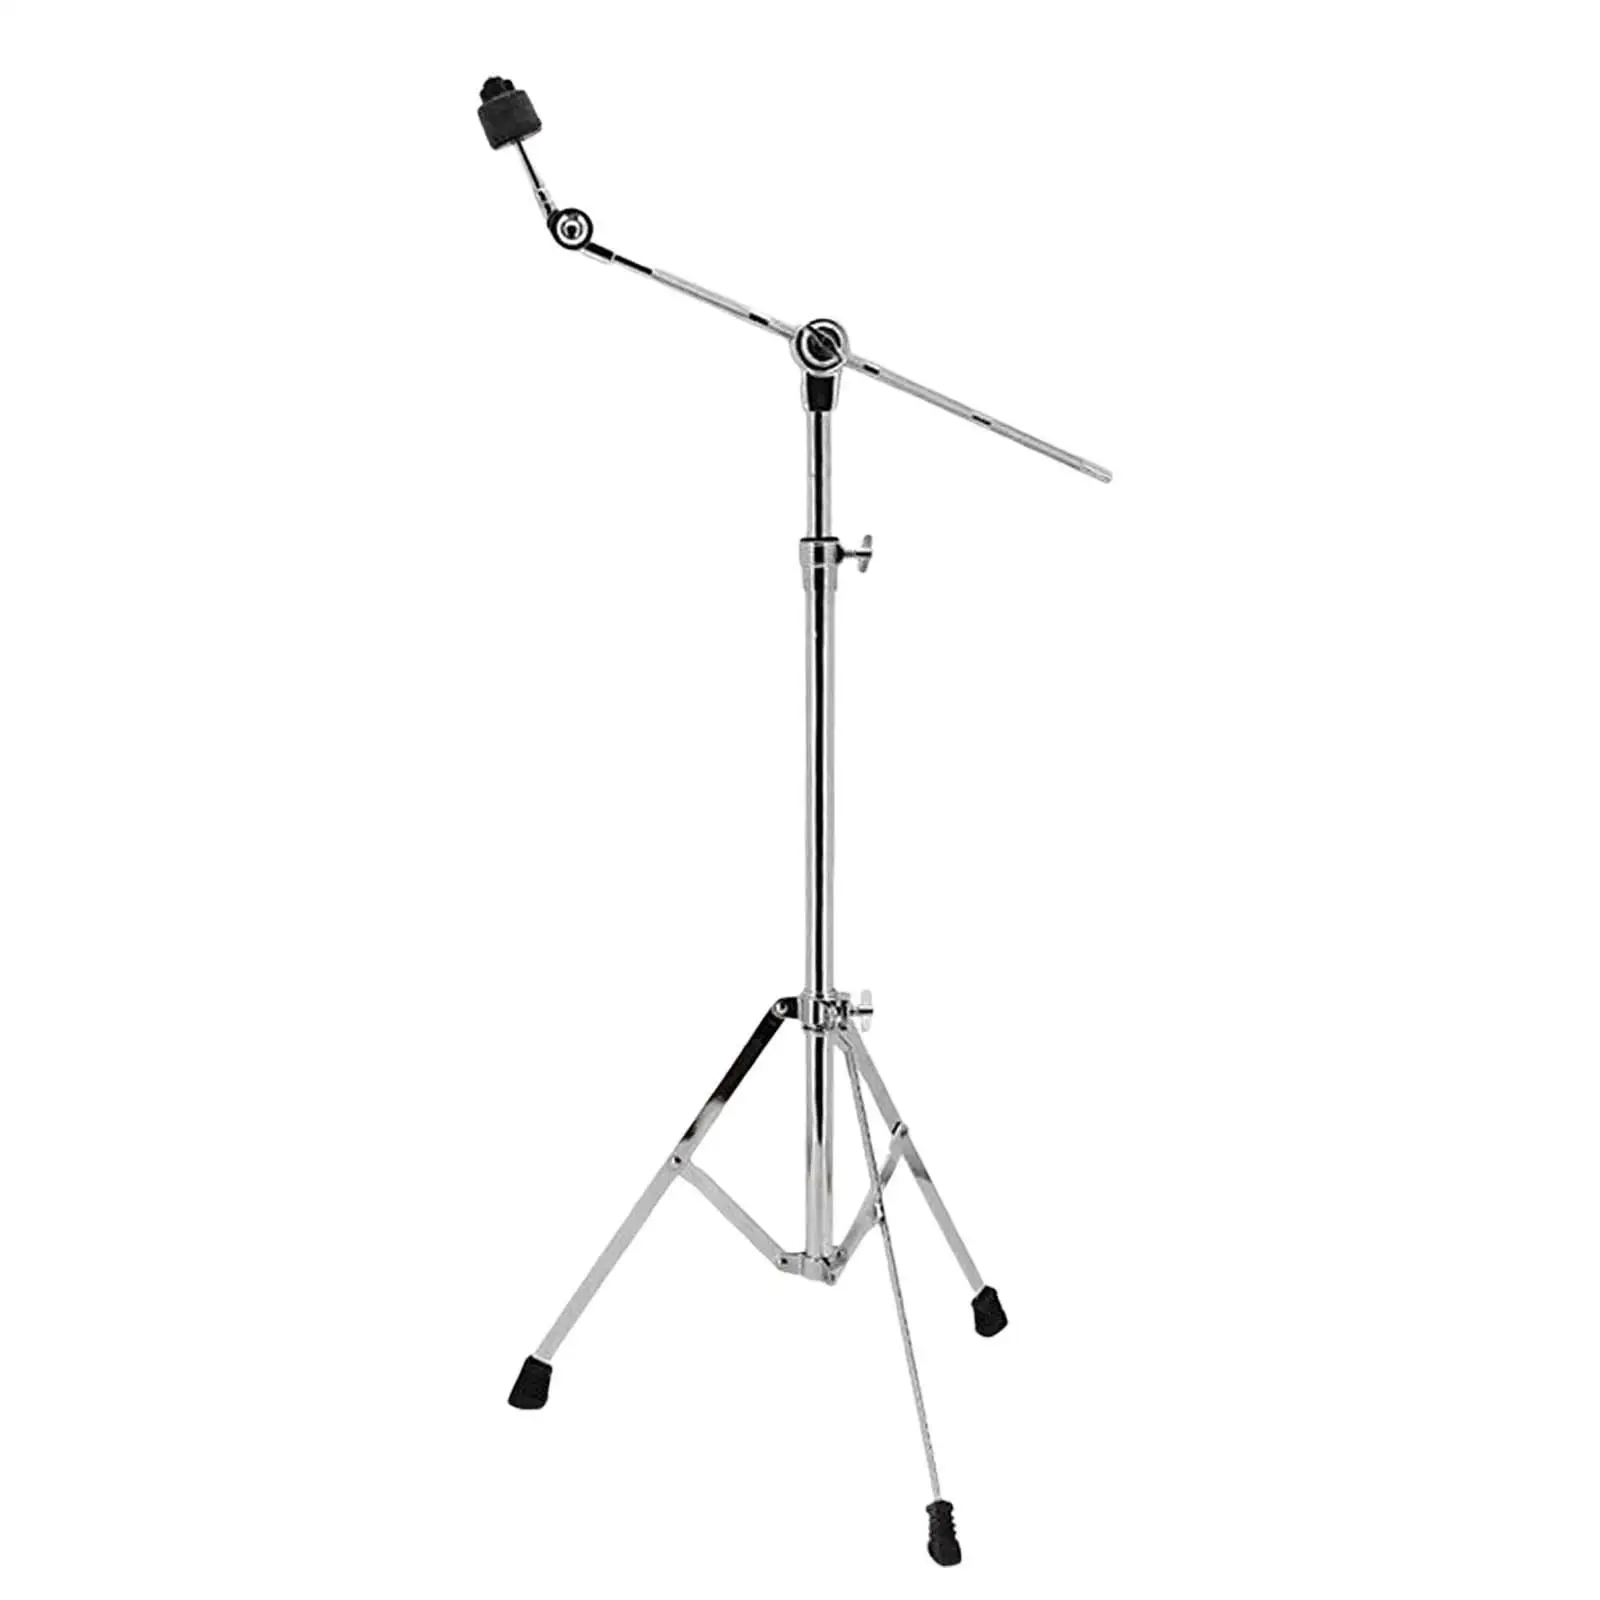 Floor Drum Stand Holder Musical Instrument Accessories for Performance Show